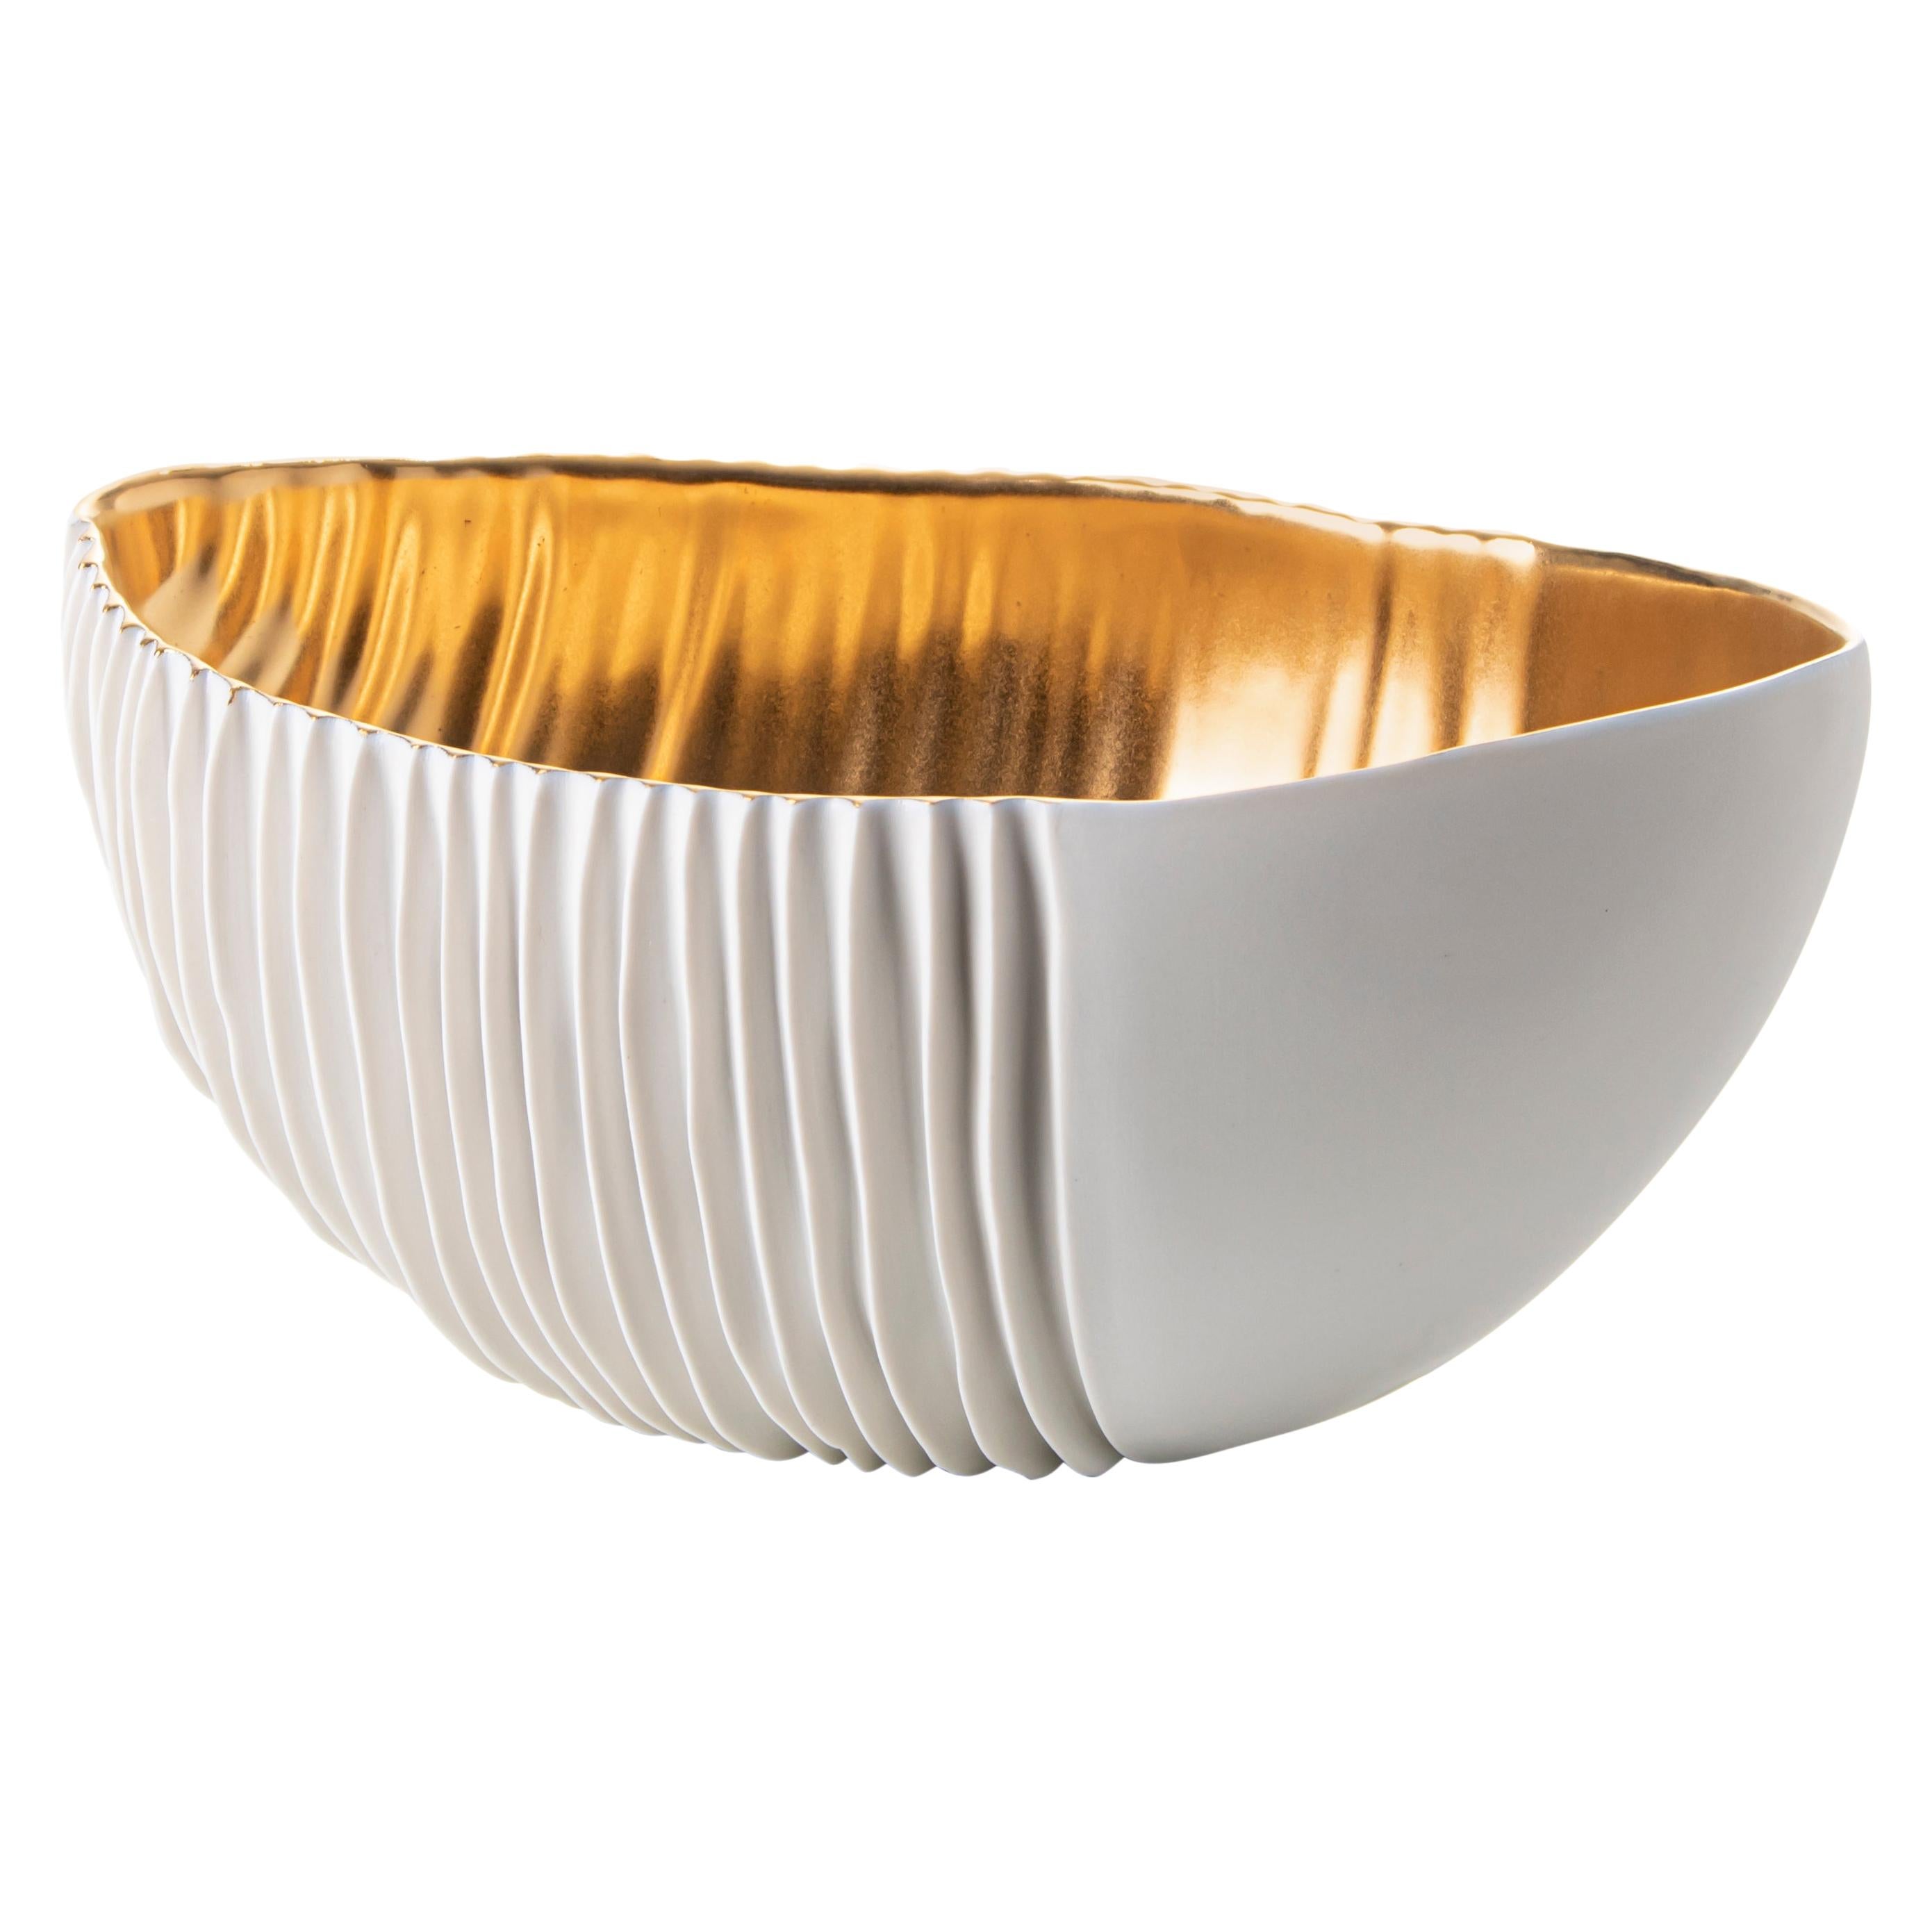 Modern Porcelain Bowl Gold Sea Shell Hand-painted White Ceramic Italy Fos